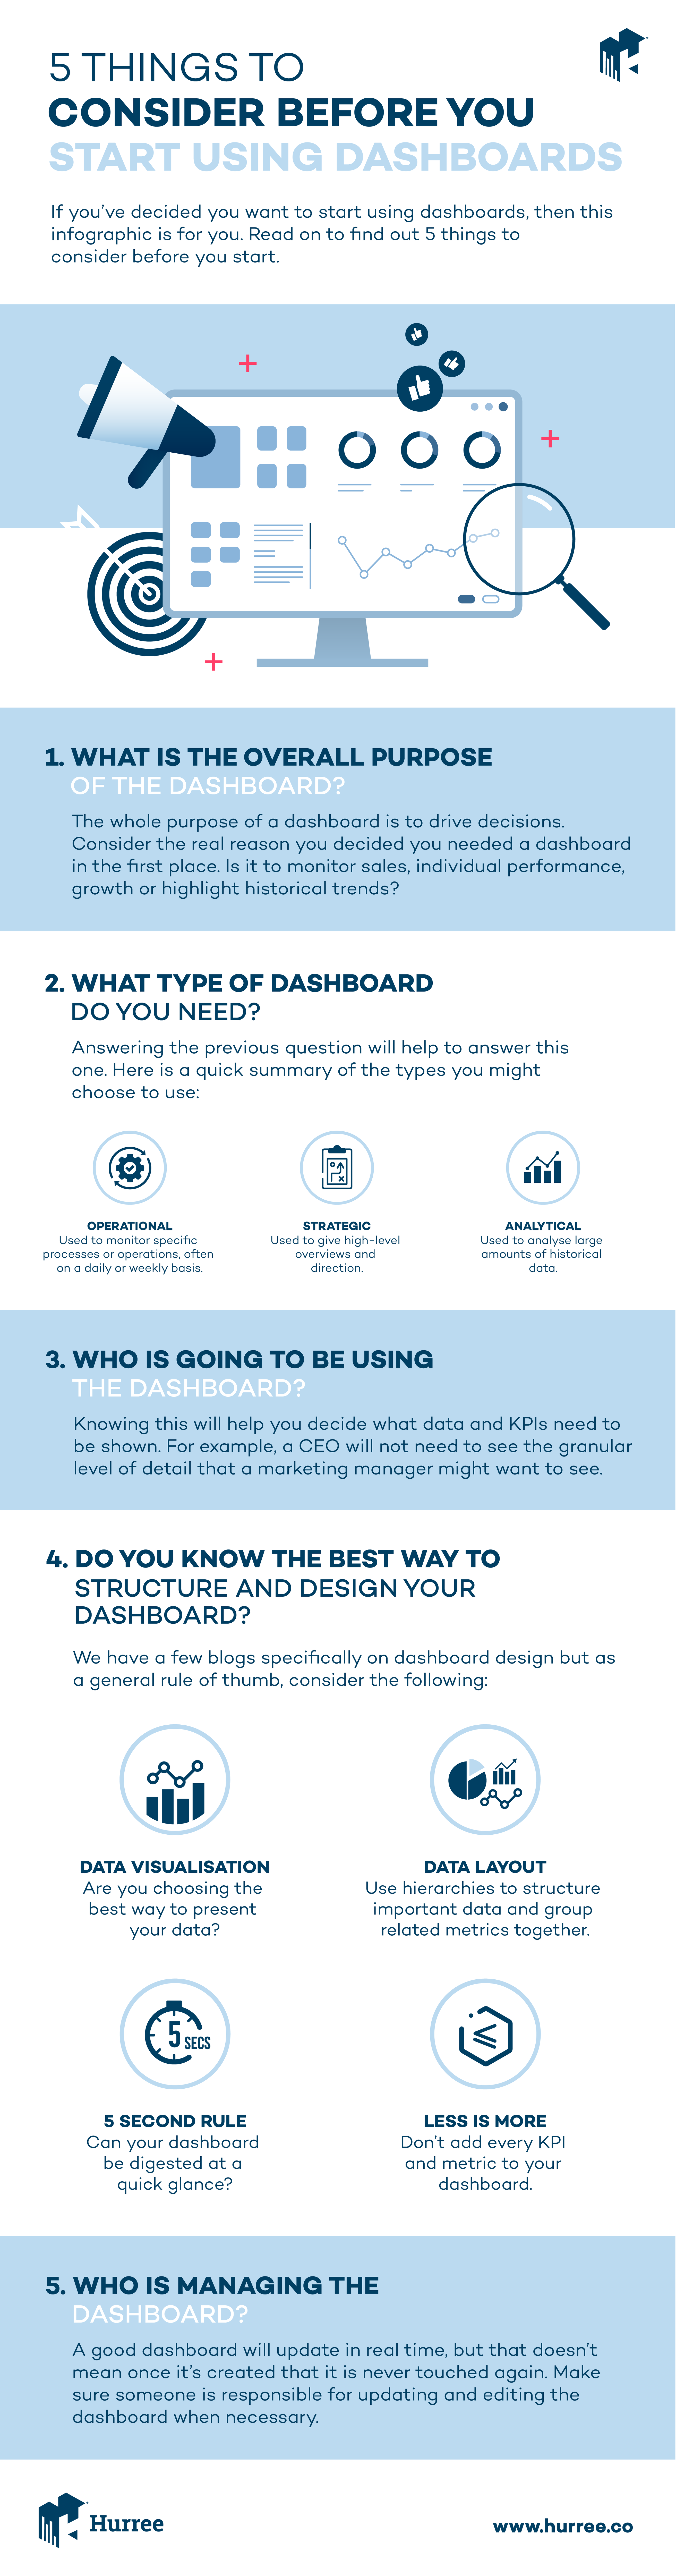 5 things to consider before using dashboards inforgraphic